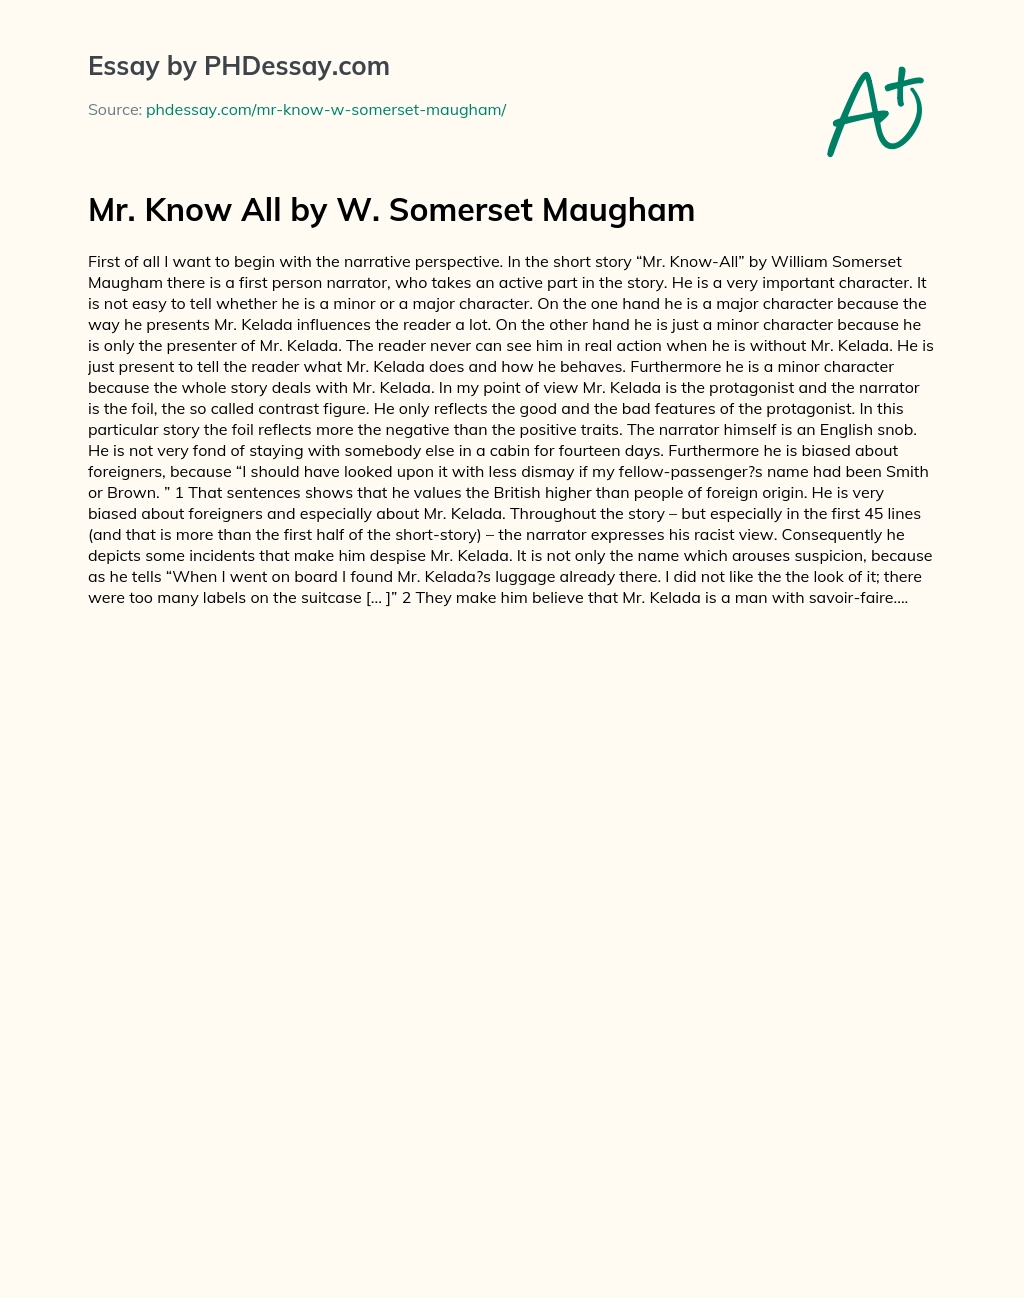 Mr. Know All by W. Somerset Maugham essay